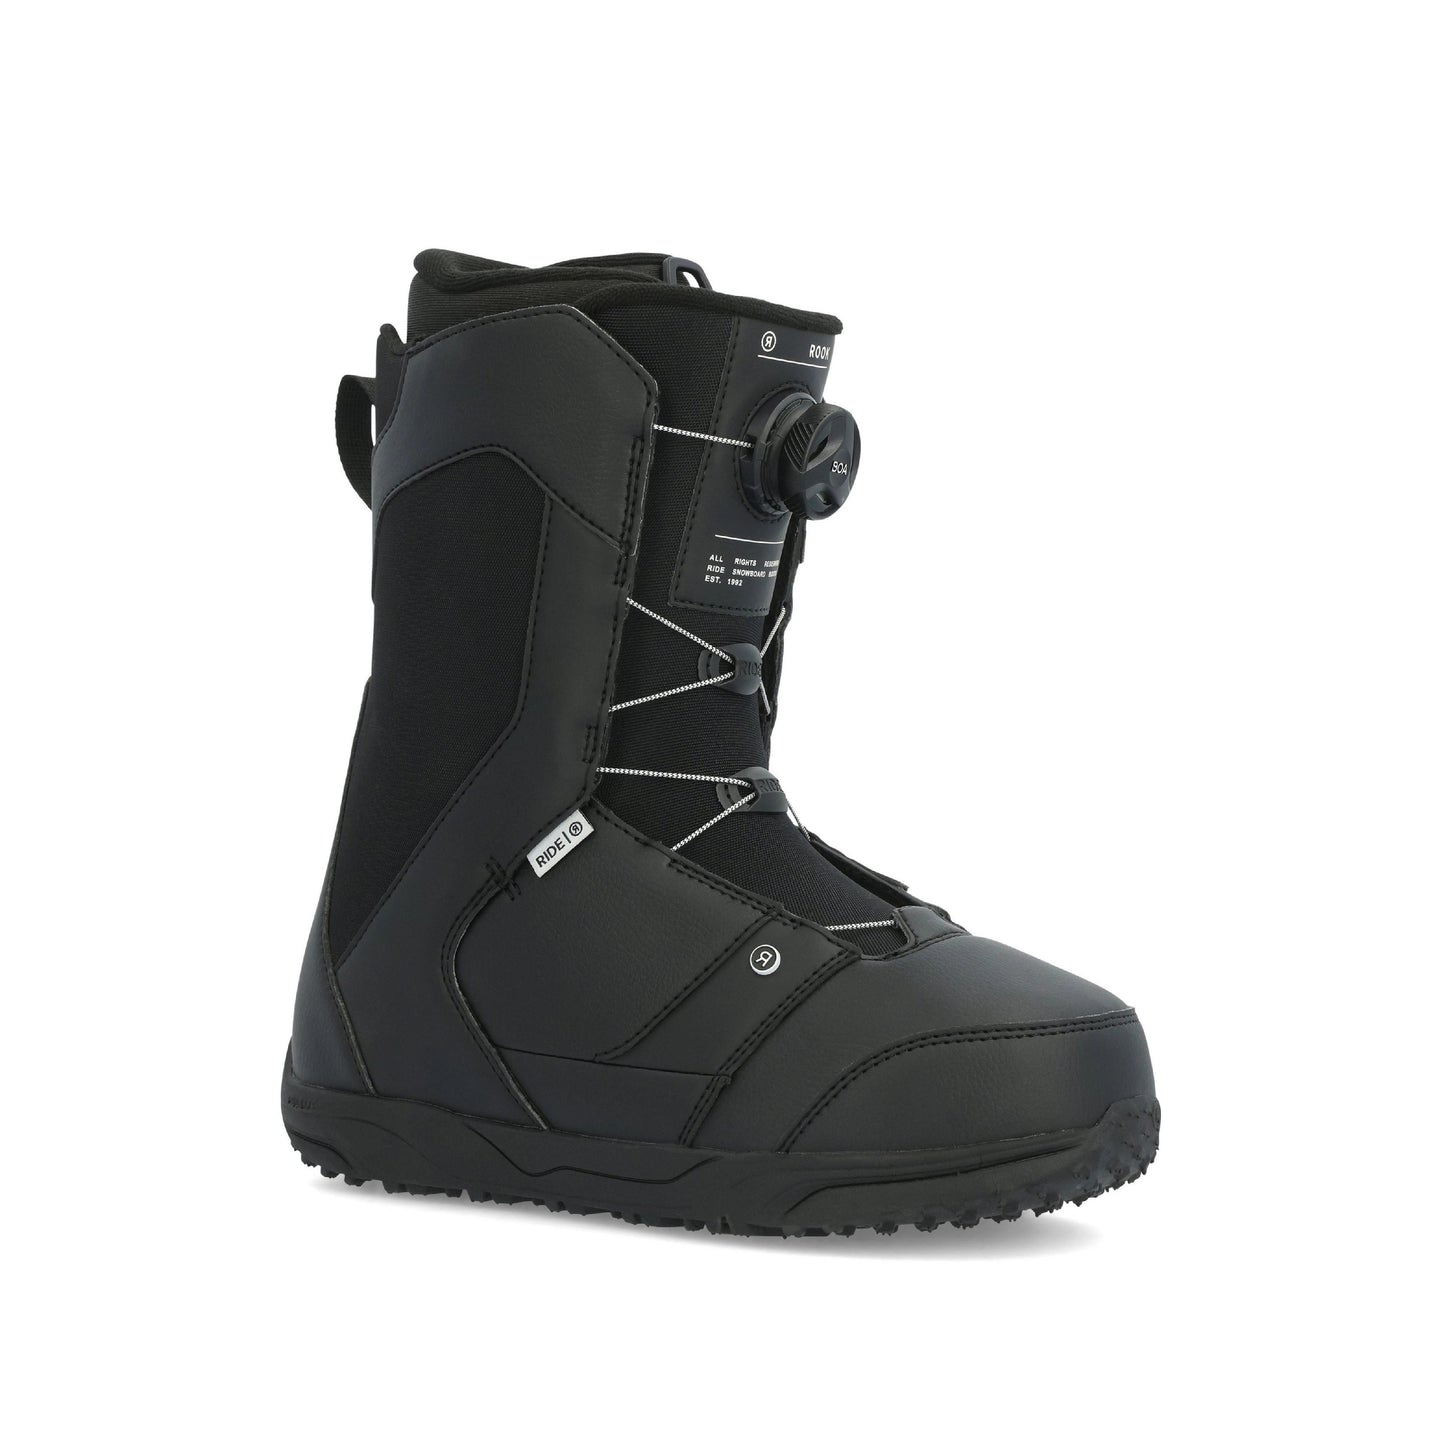 Ride Rook Snowboard Boots - Openbox Black 9 - Ride Snowboard Boots